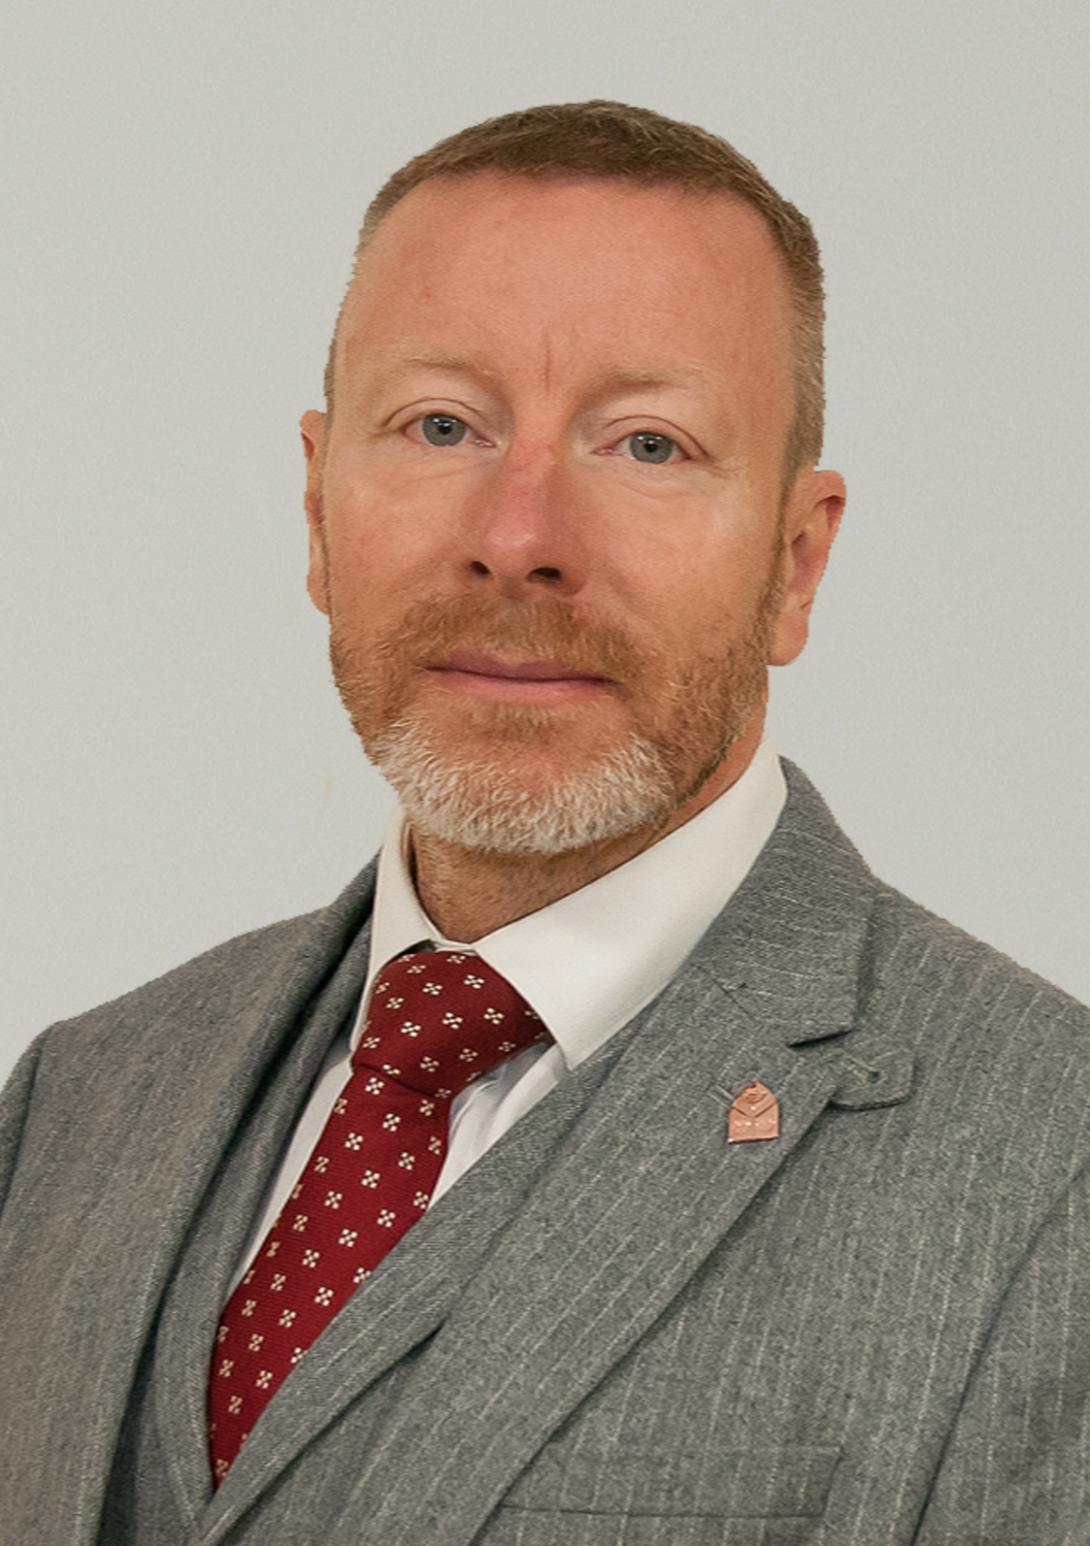 Gavin Rimmer wearing a grey suit with a red tie